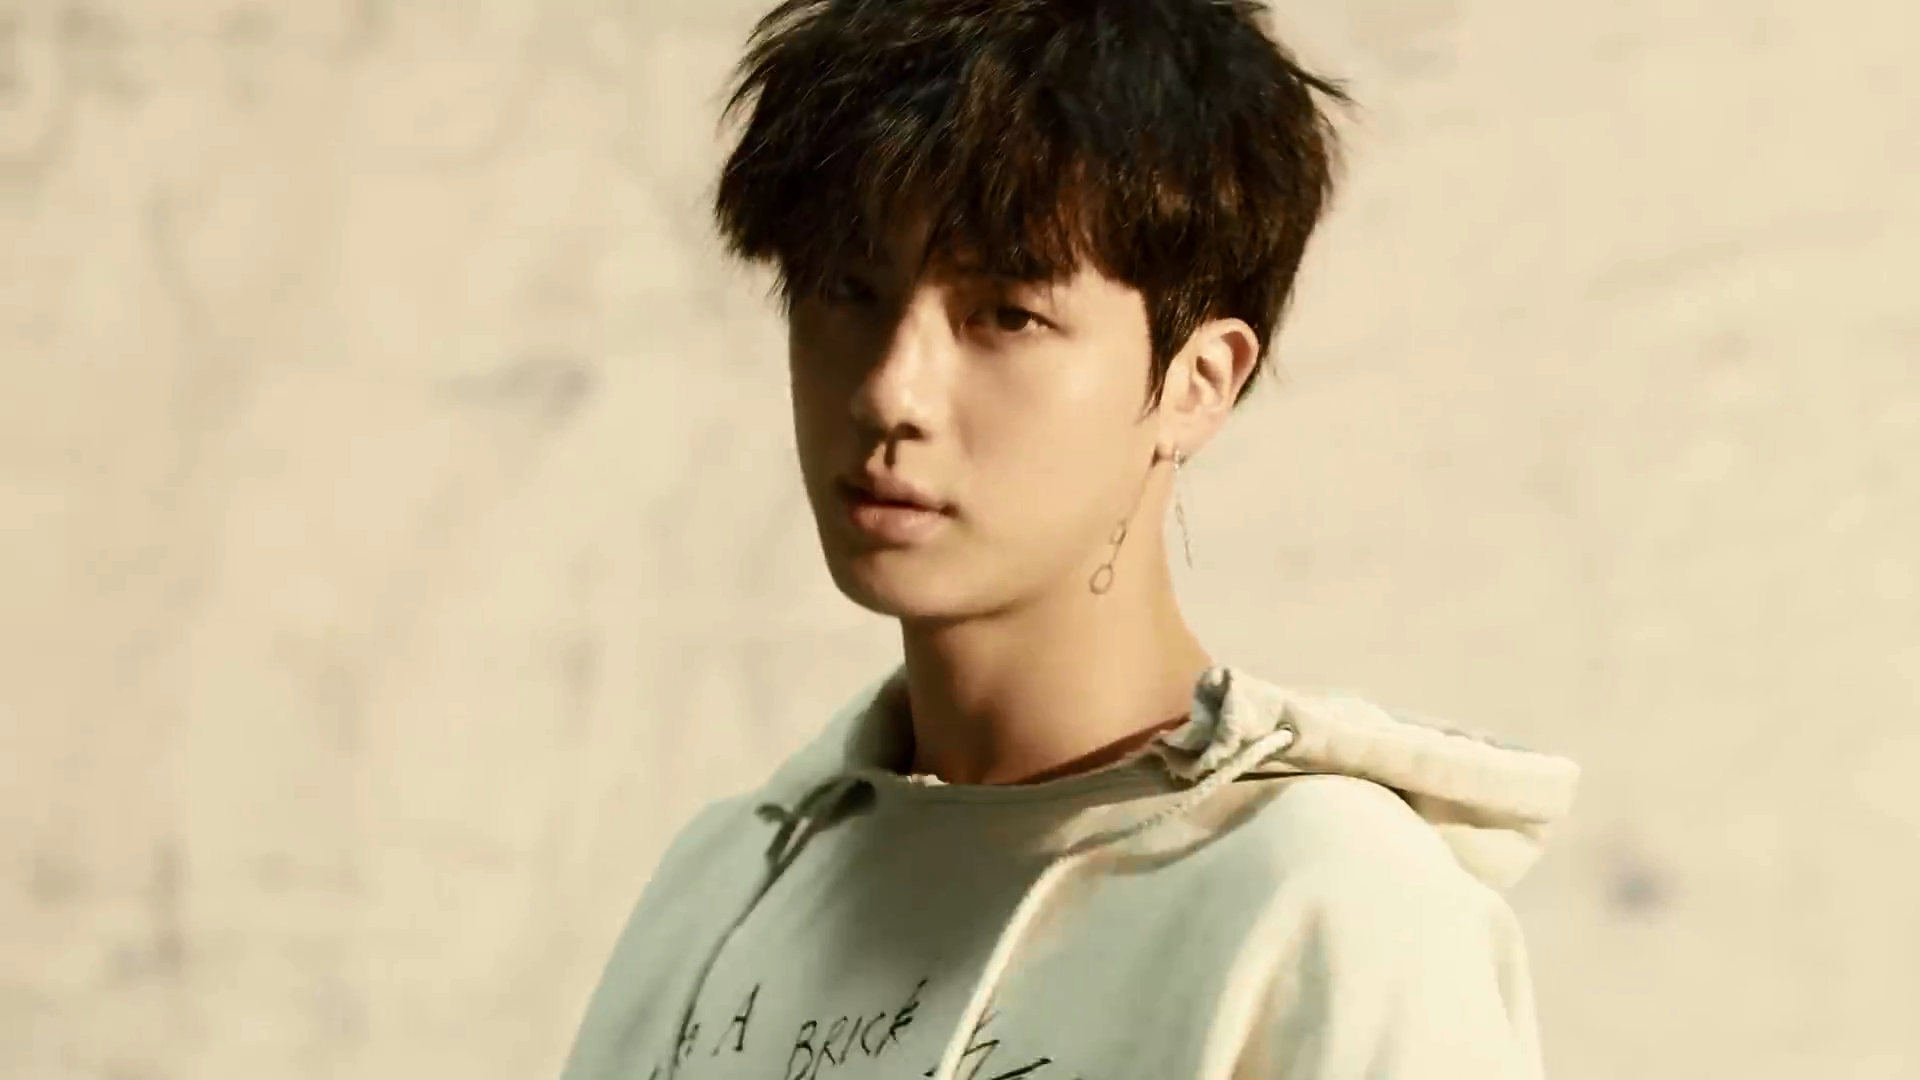 BTS - Fake Love who's who - K-Pop Database / 